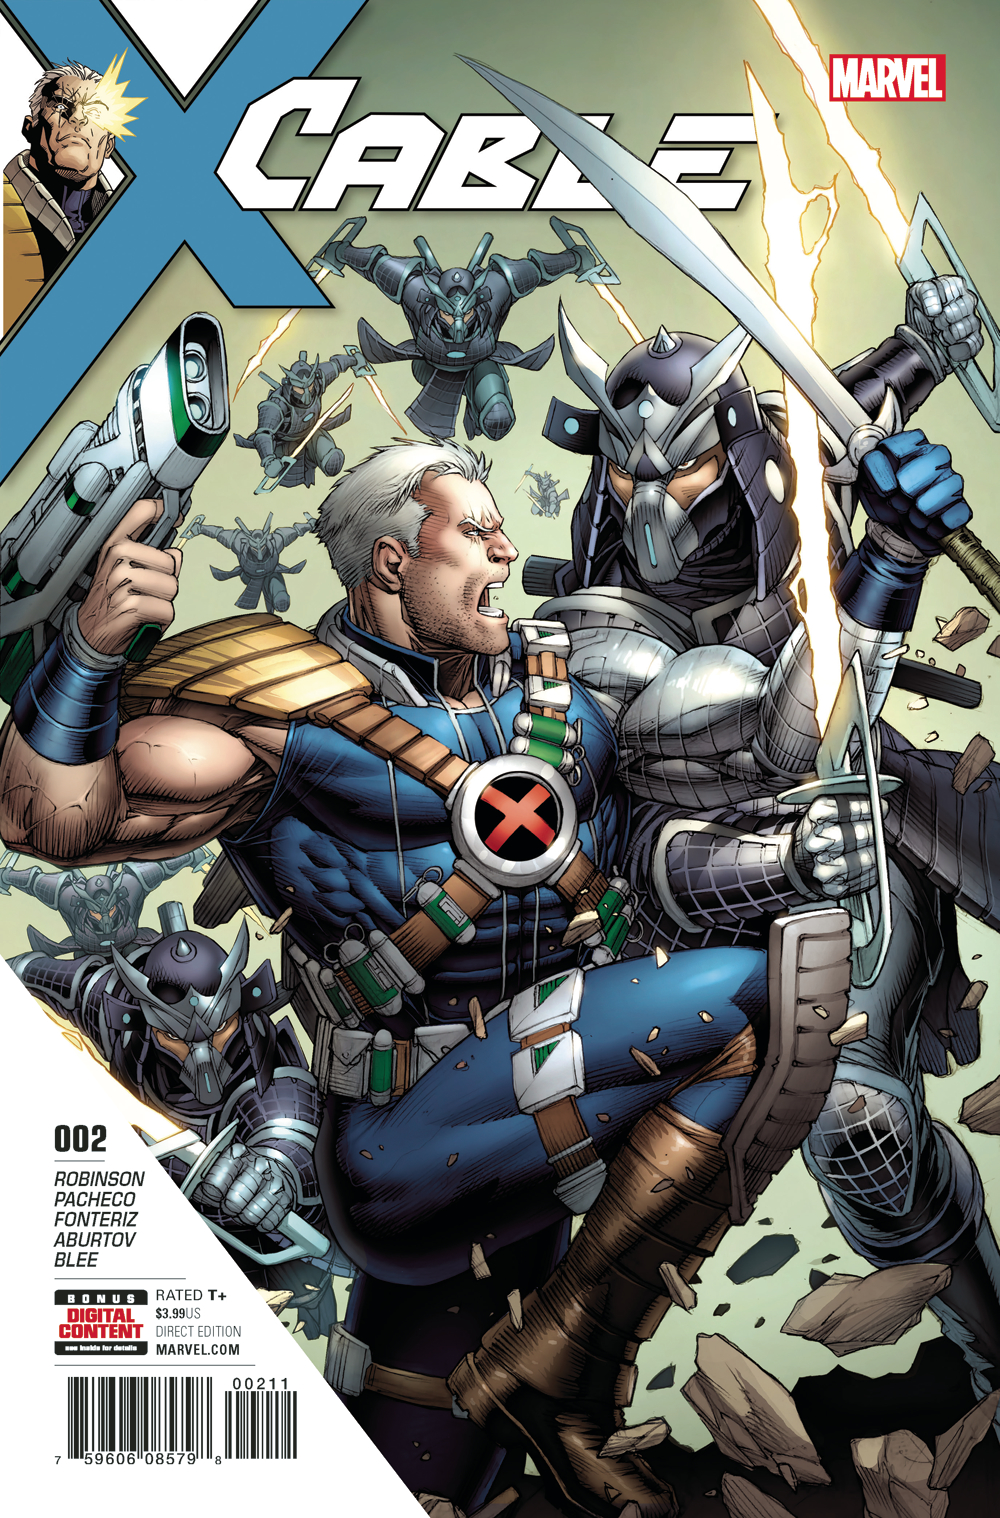 CABLE #2